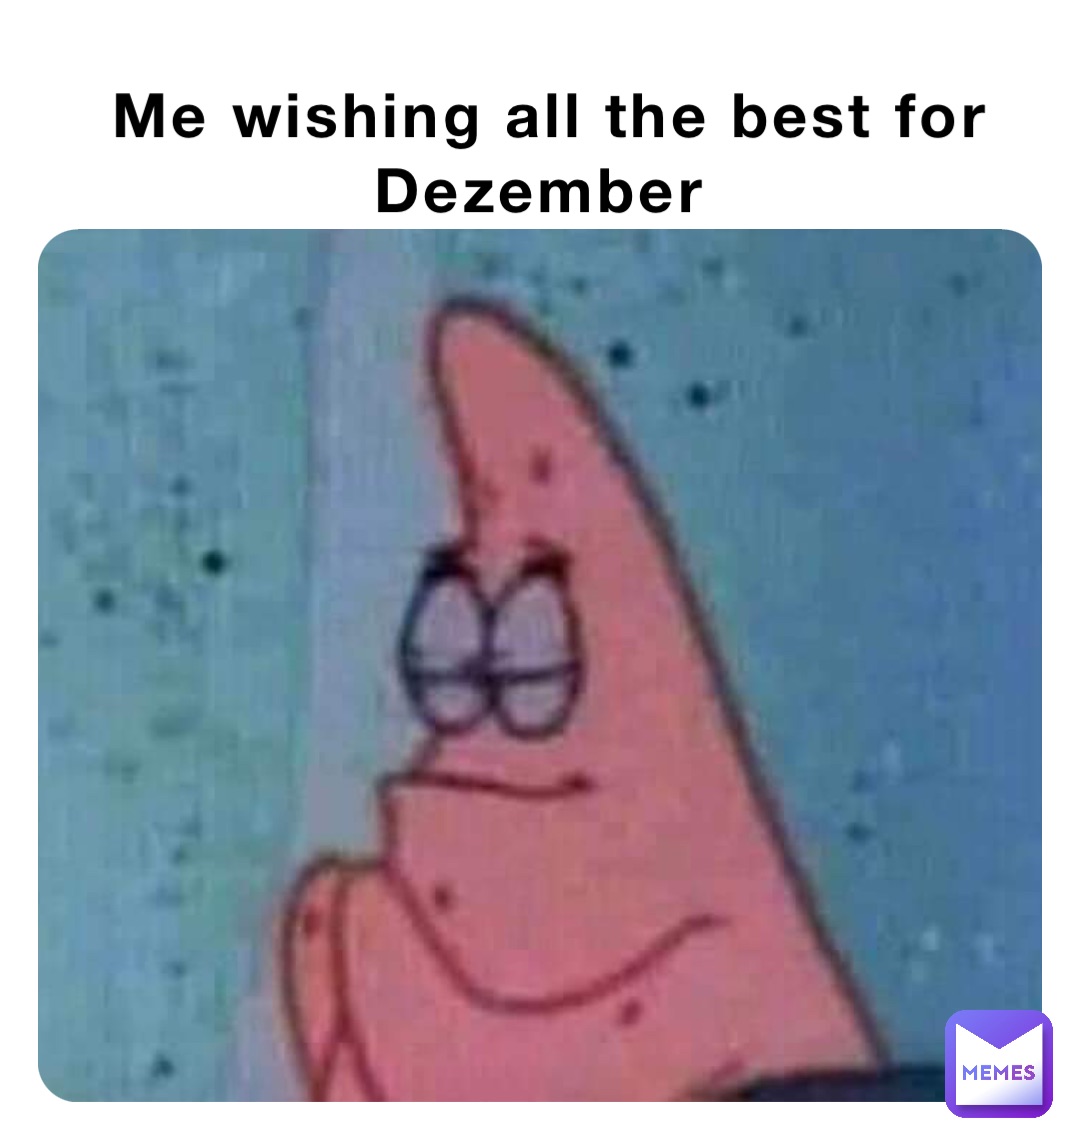 Me wishing all the best for Dezember